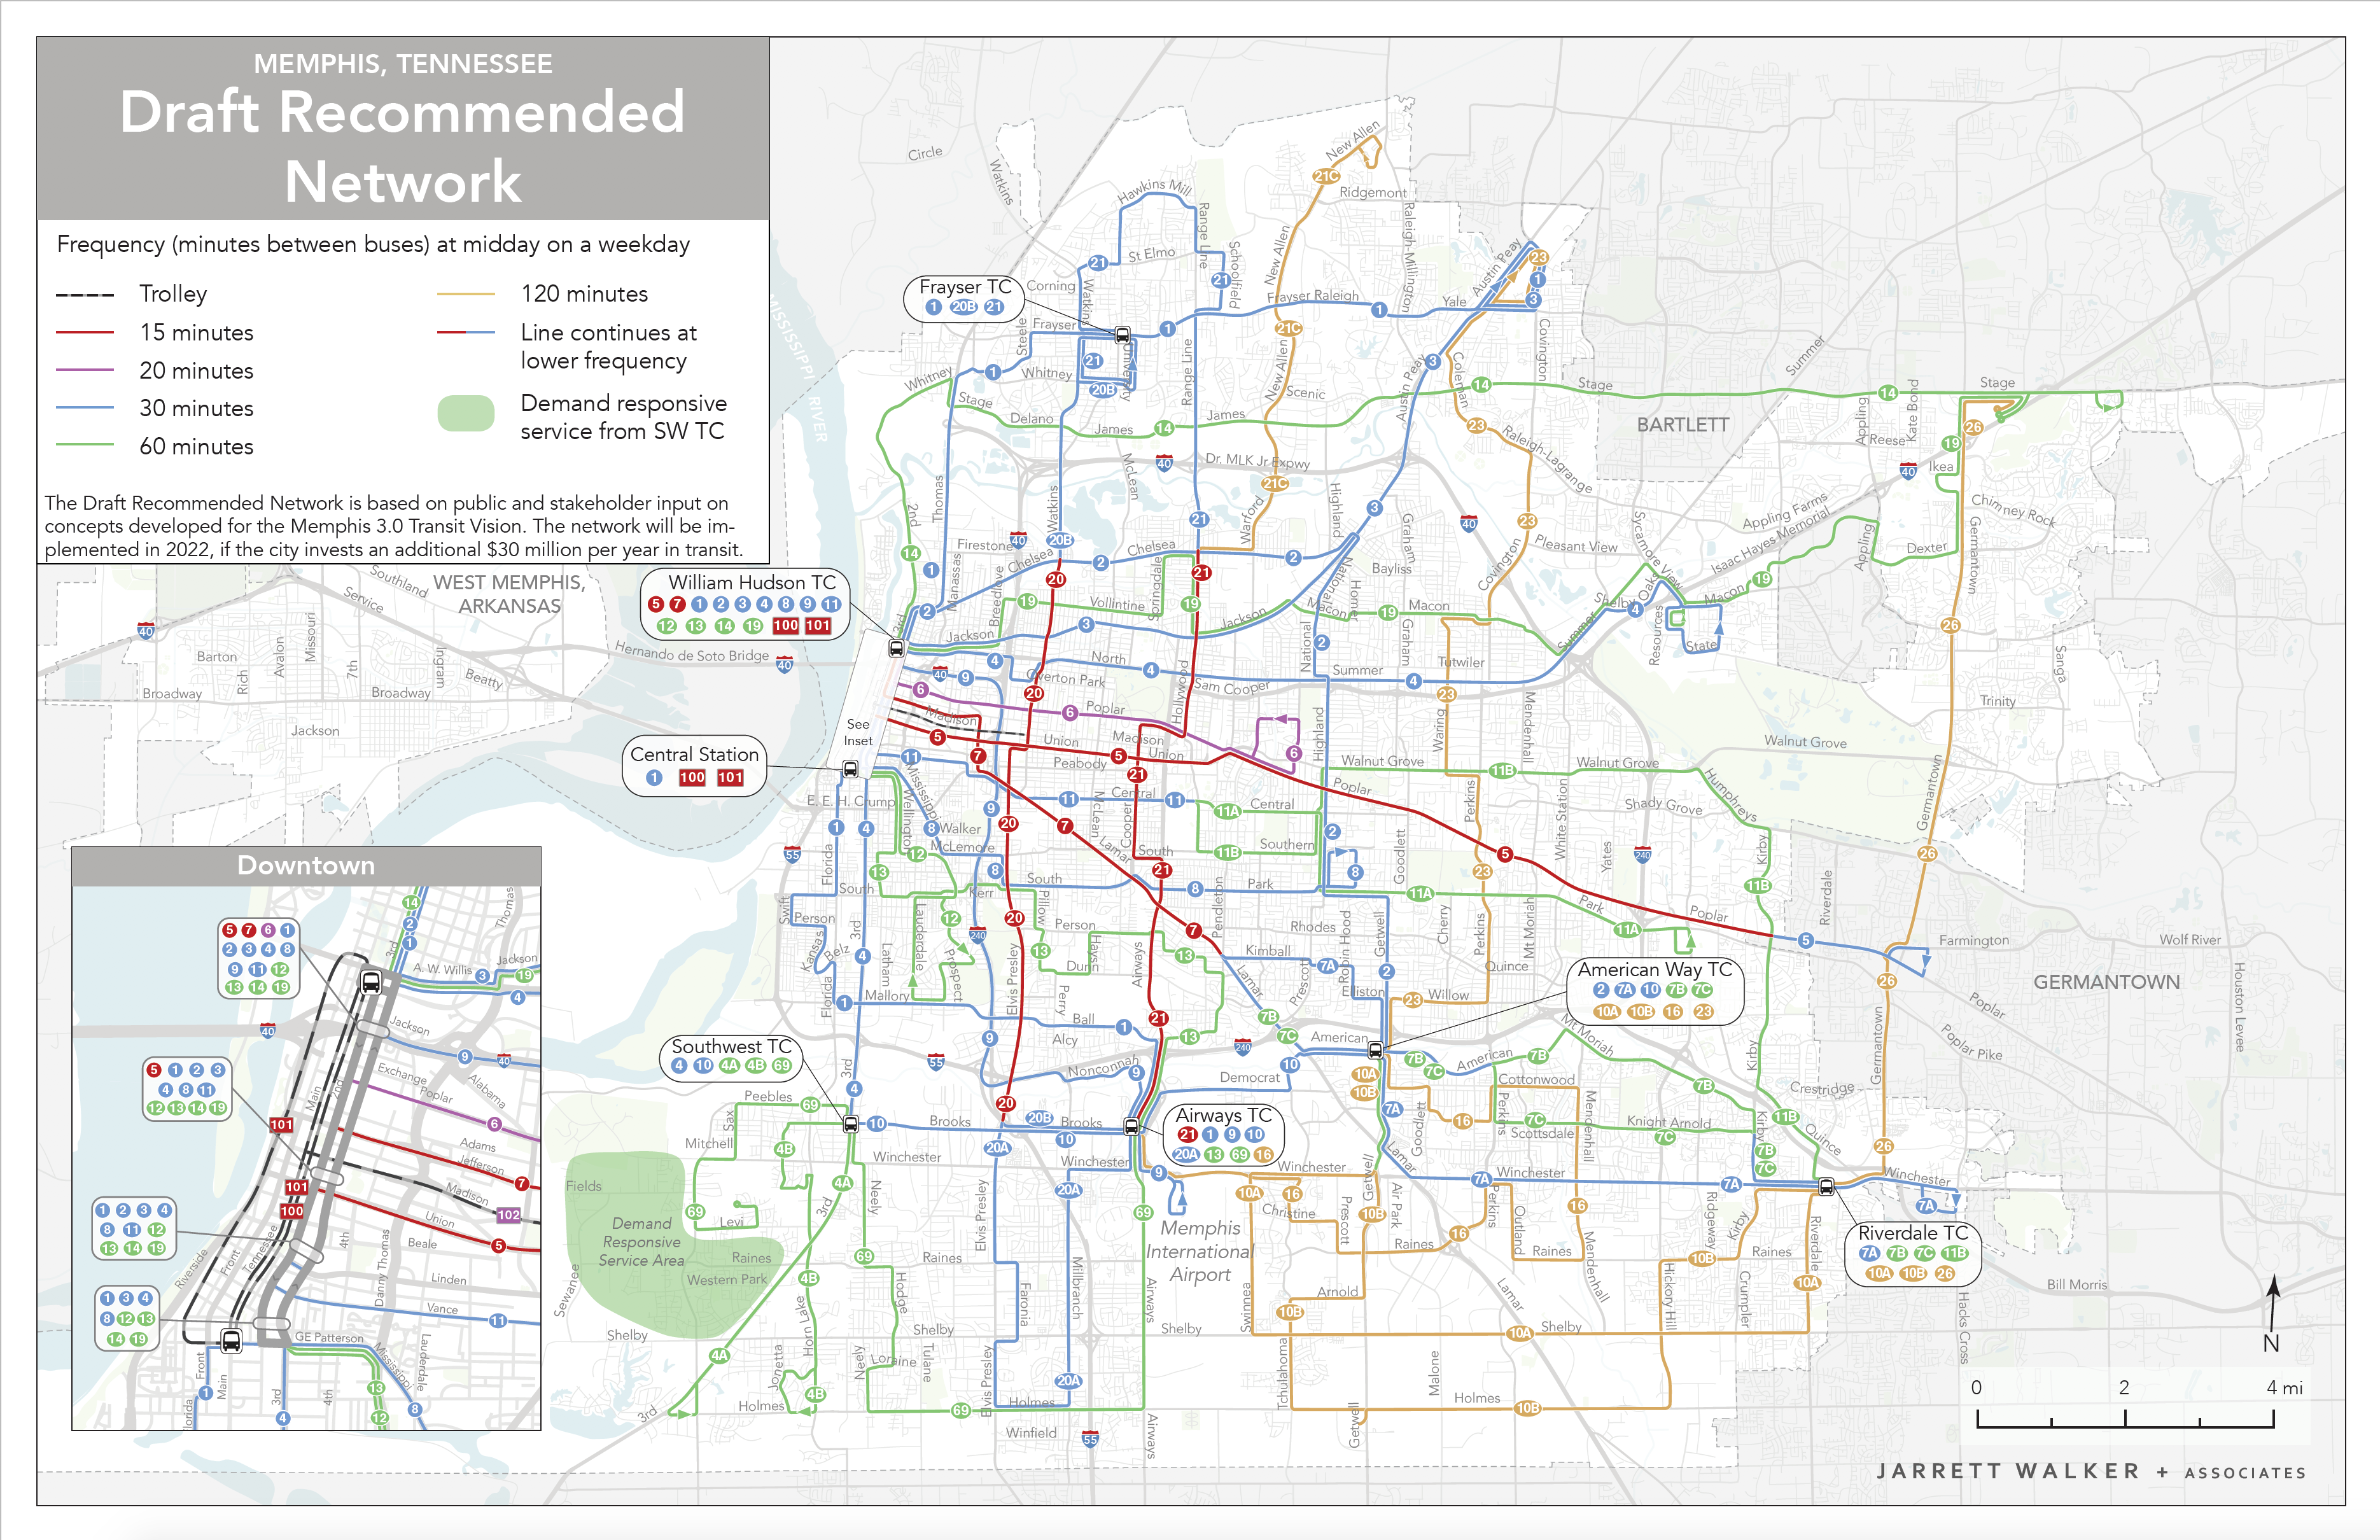 Image of draft recommended transit map in the City of Memphis